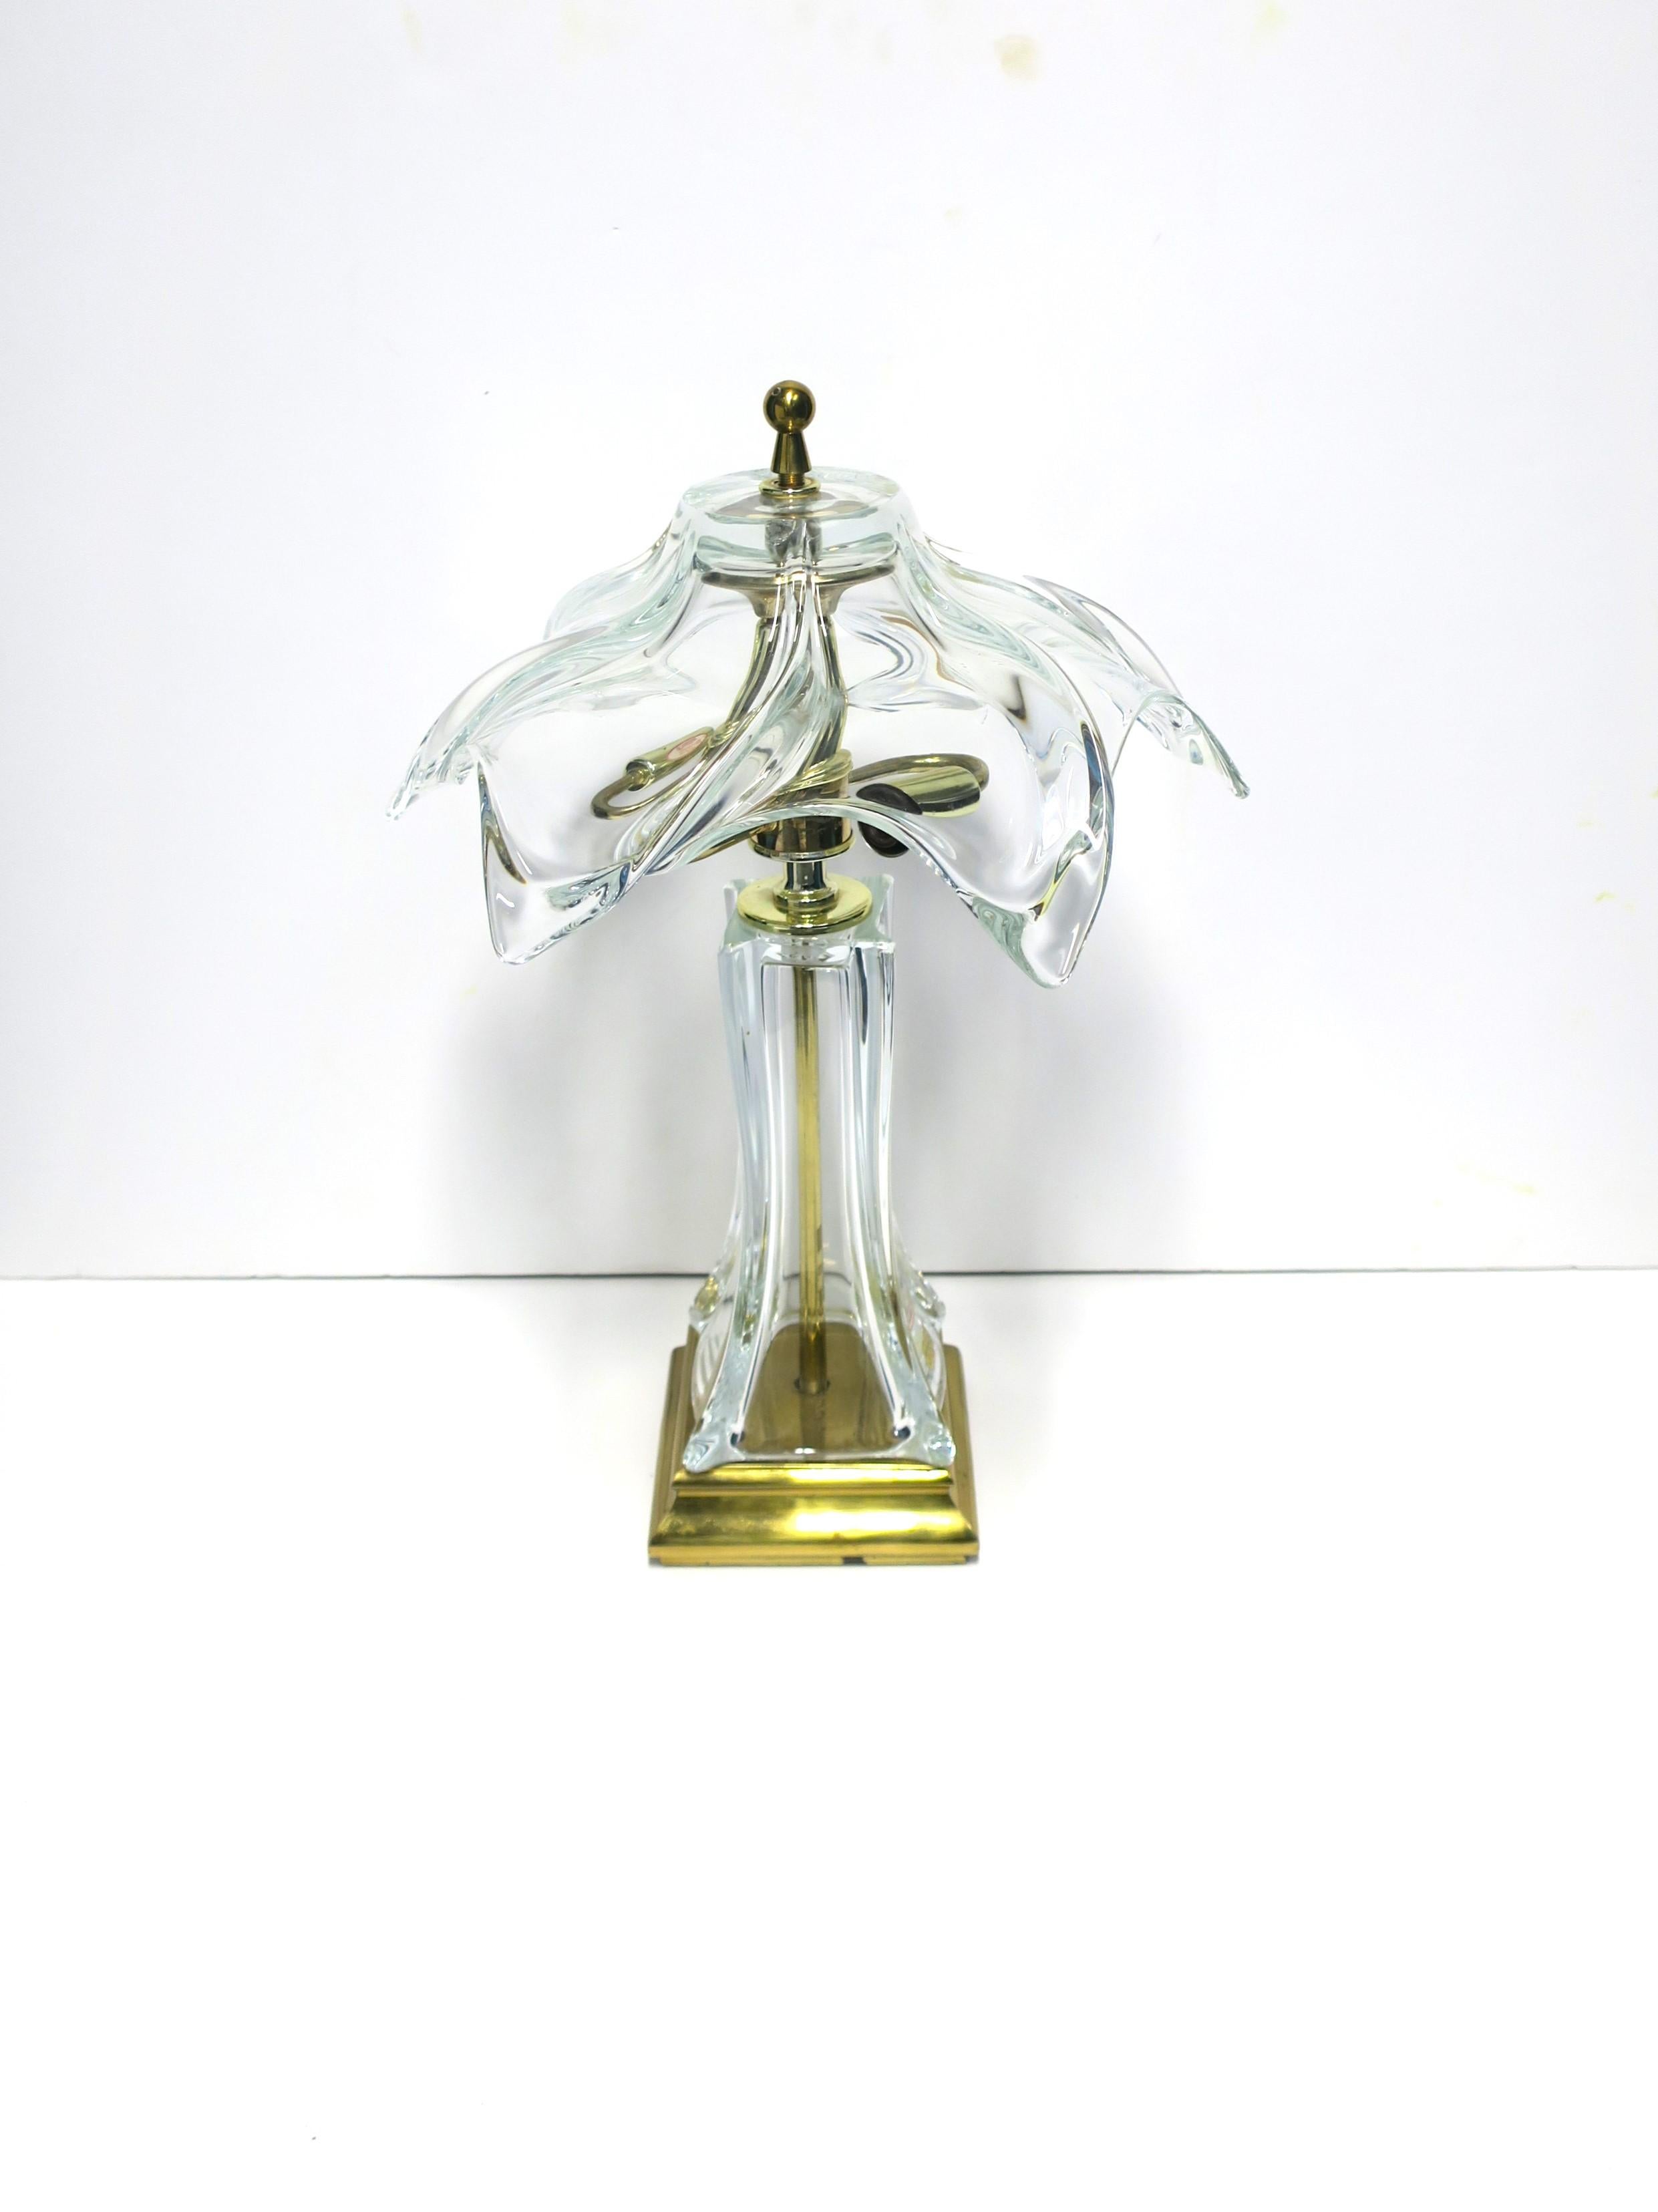 A French crystal and brass desk or table lamp in the modern and Art Nouveau design styles, circa 1960s, Paris, France. Lamp has a French crystal shade and body, solid brass rod at center, and a lacquered brass base. Light holds two chandelier